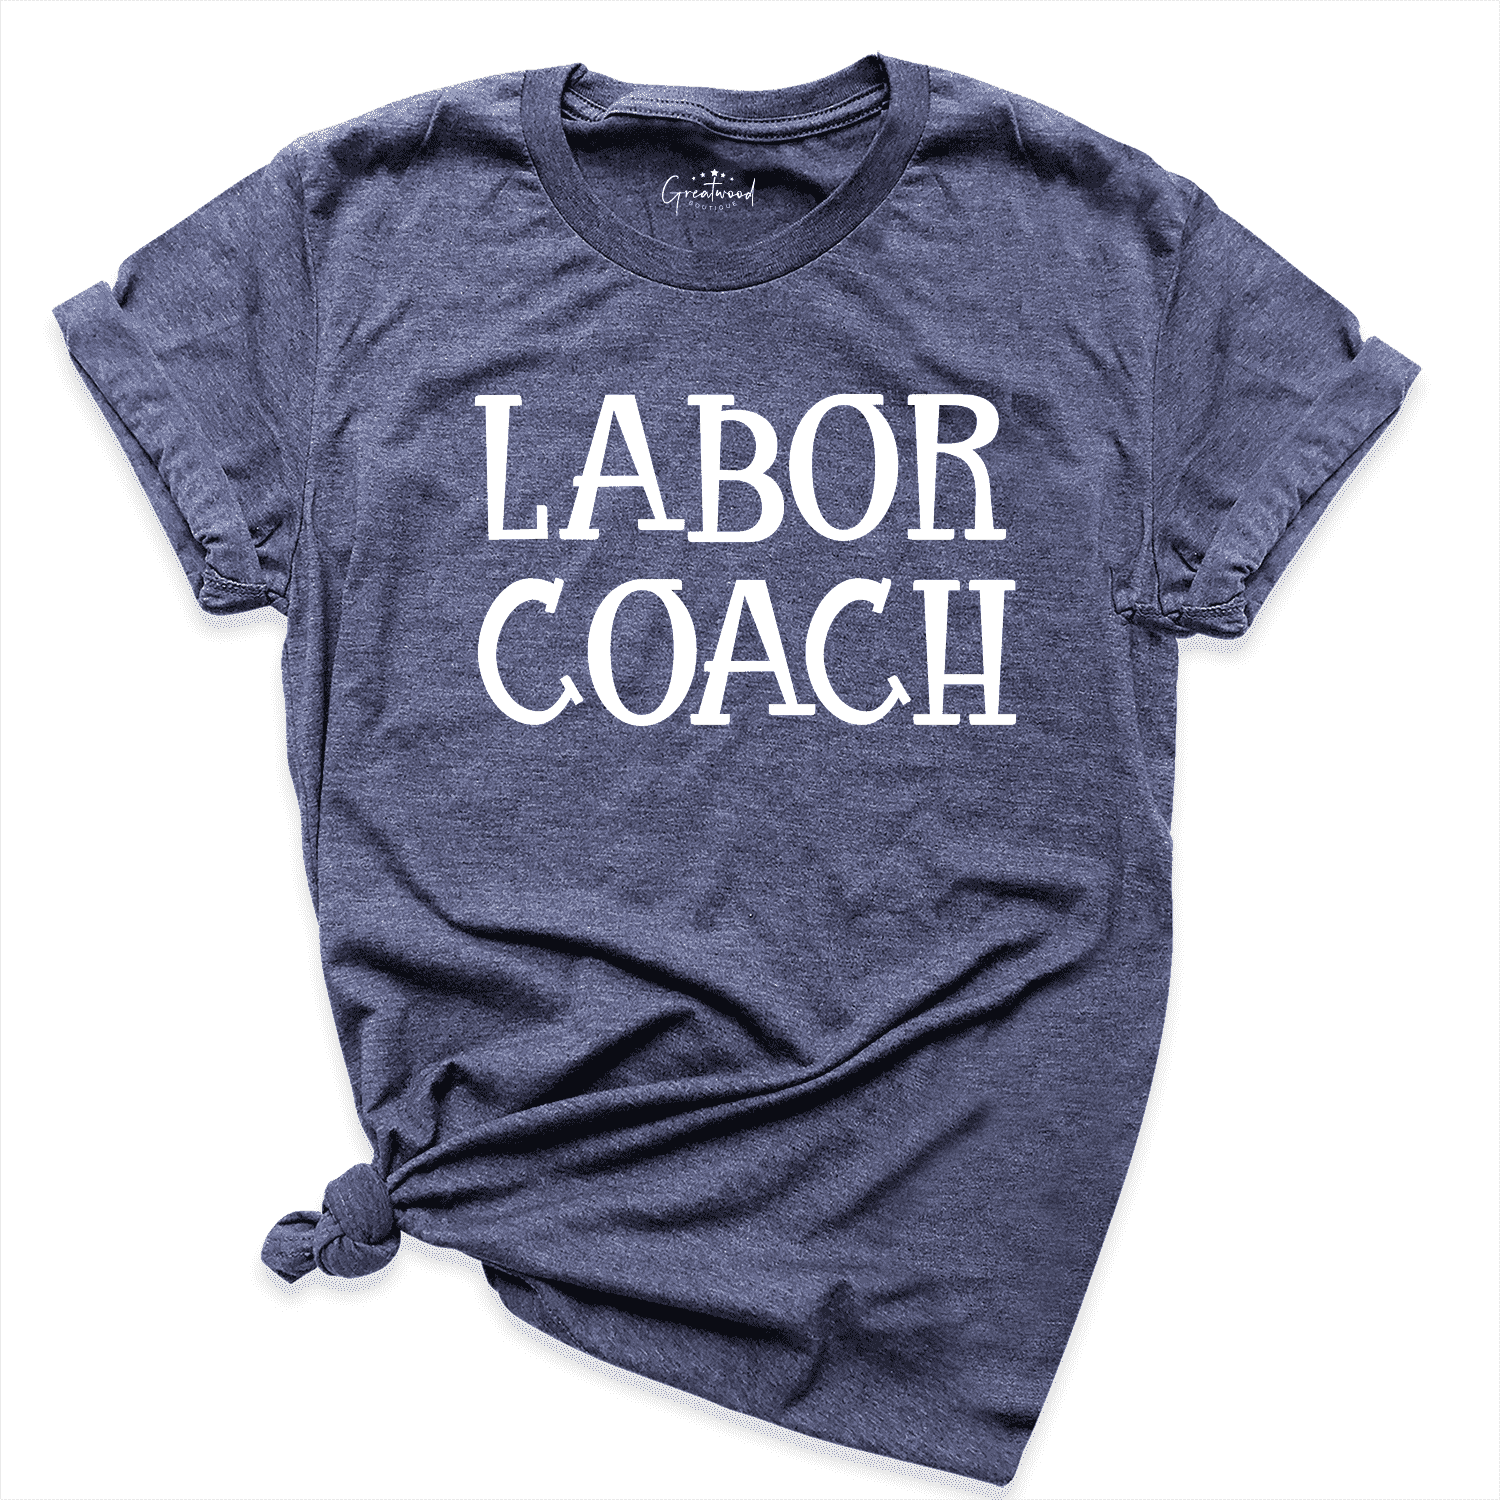 Labor Coach Shirt Navy - Greatwood Boutique